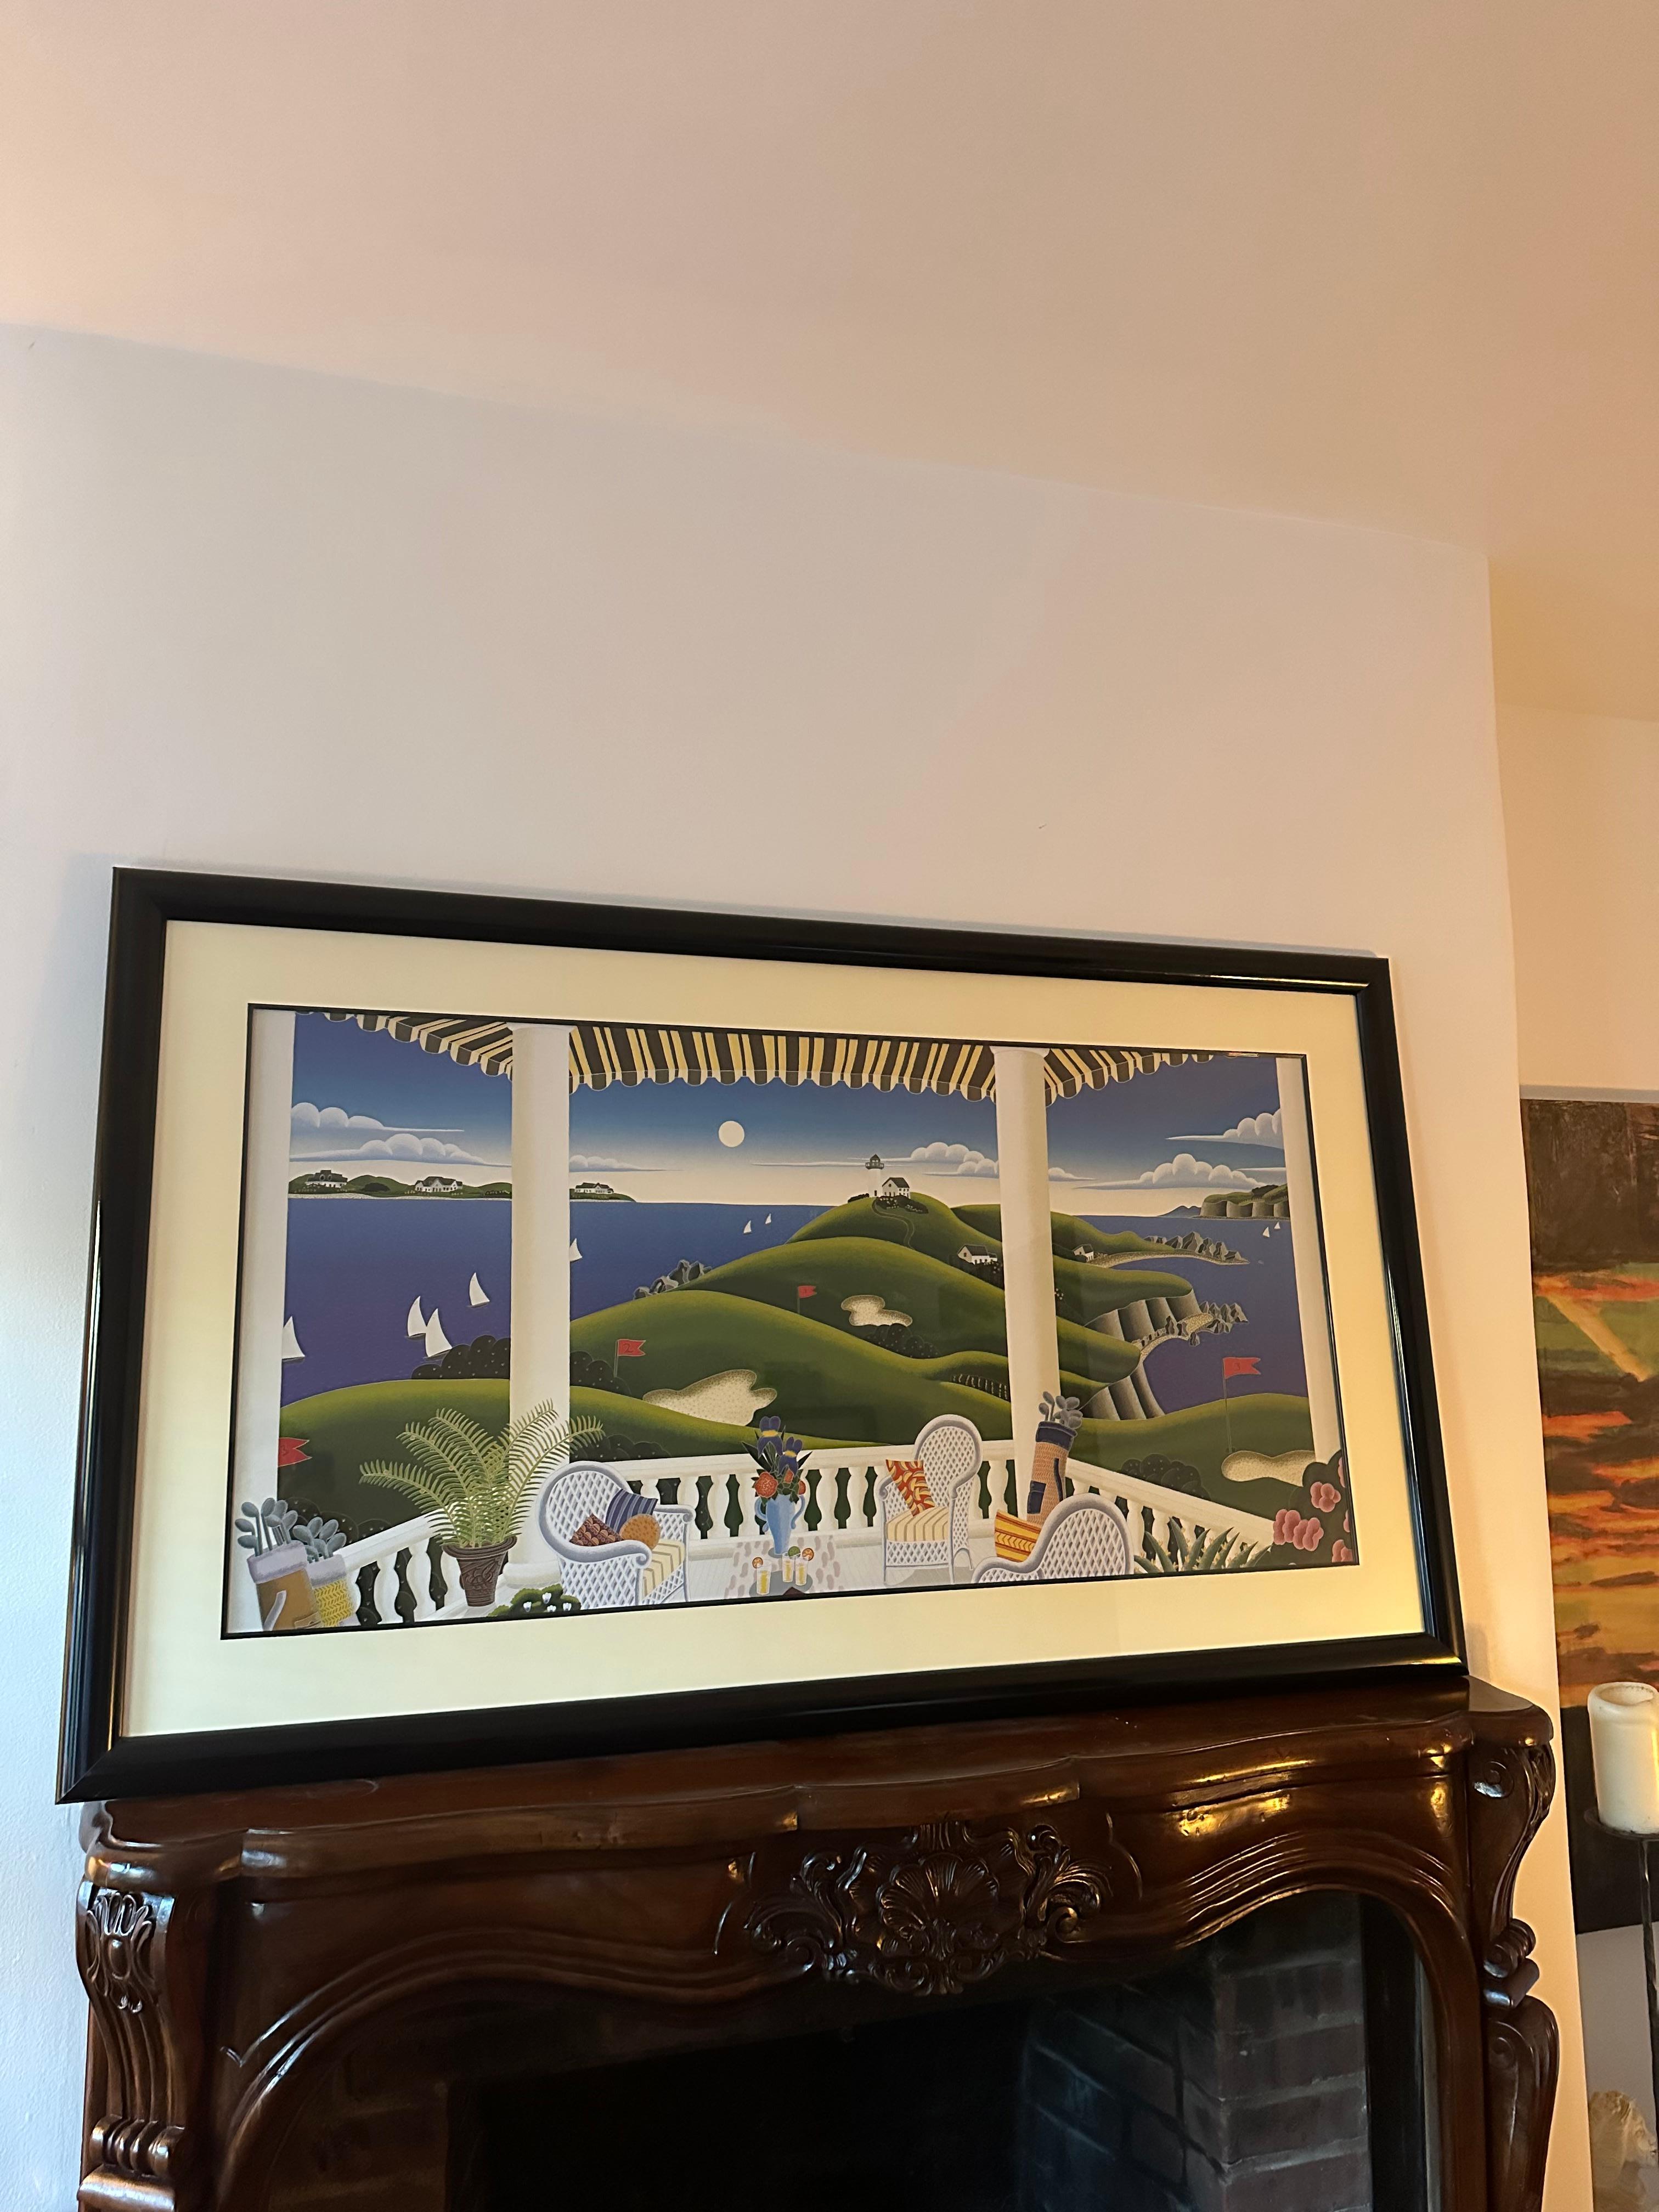 1980s large framed Thomas McKnight Serigraph, depicting a scene in Rhode Island on a golf course, vibrant blues & greens that are typical of Mcknights dreamscapes - matted and framed, in nearly perfect condition with no notable flaws.